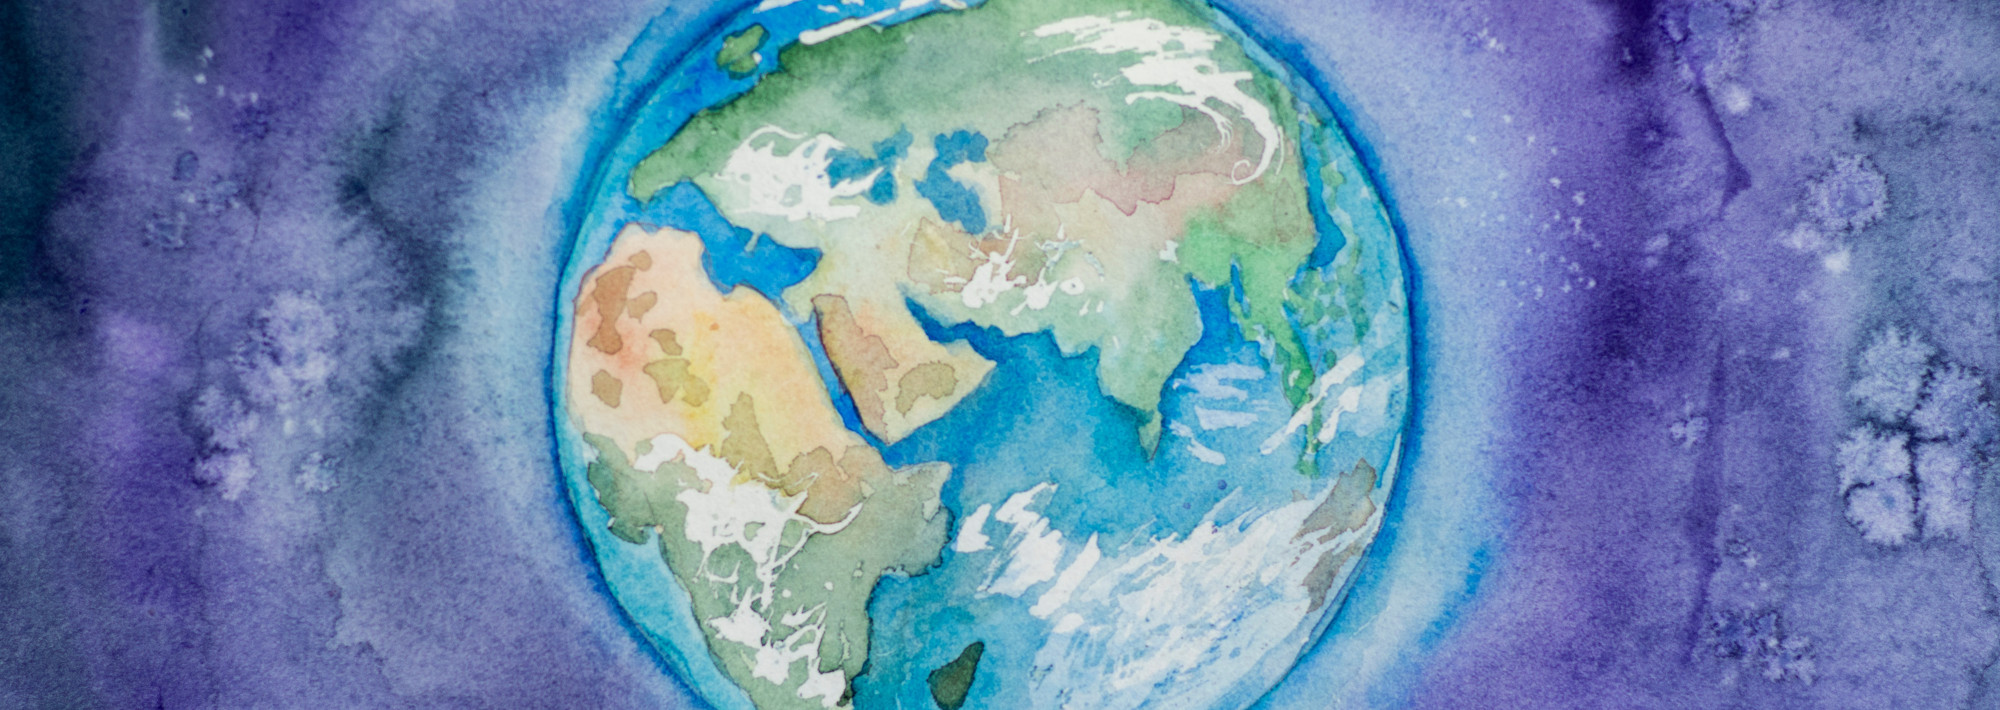 A watercolor painting of the Earth, centered on Africa and Asia, on a blue/purple background.